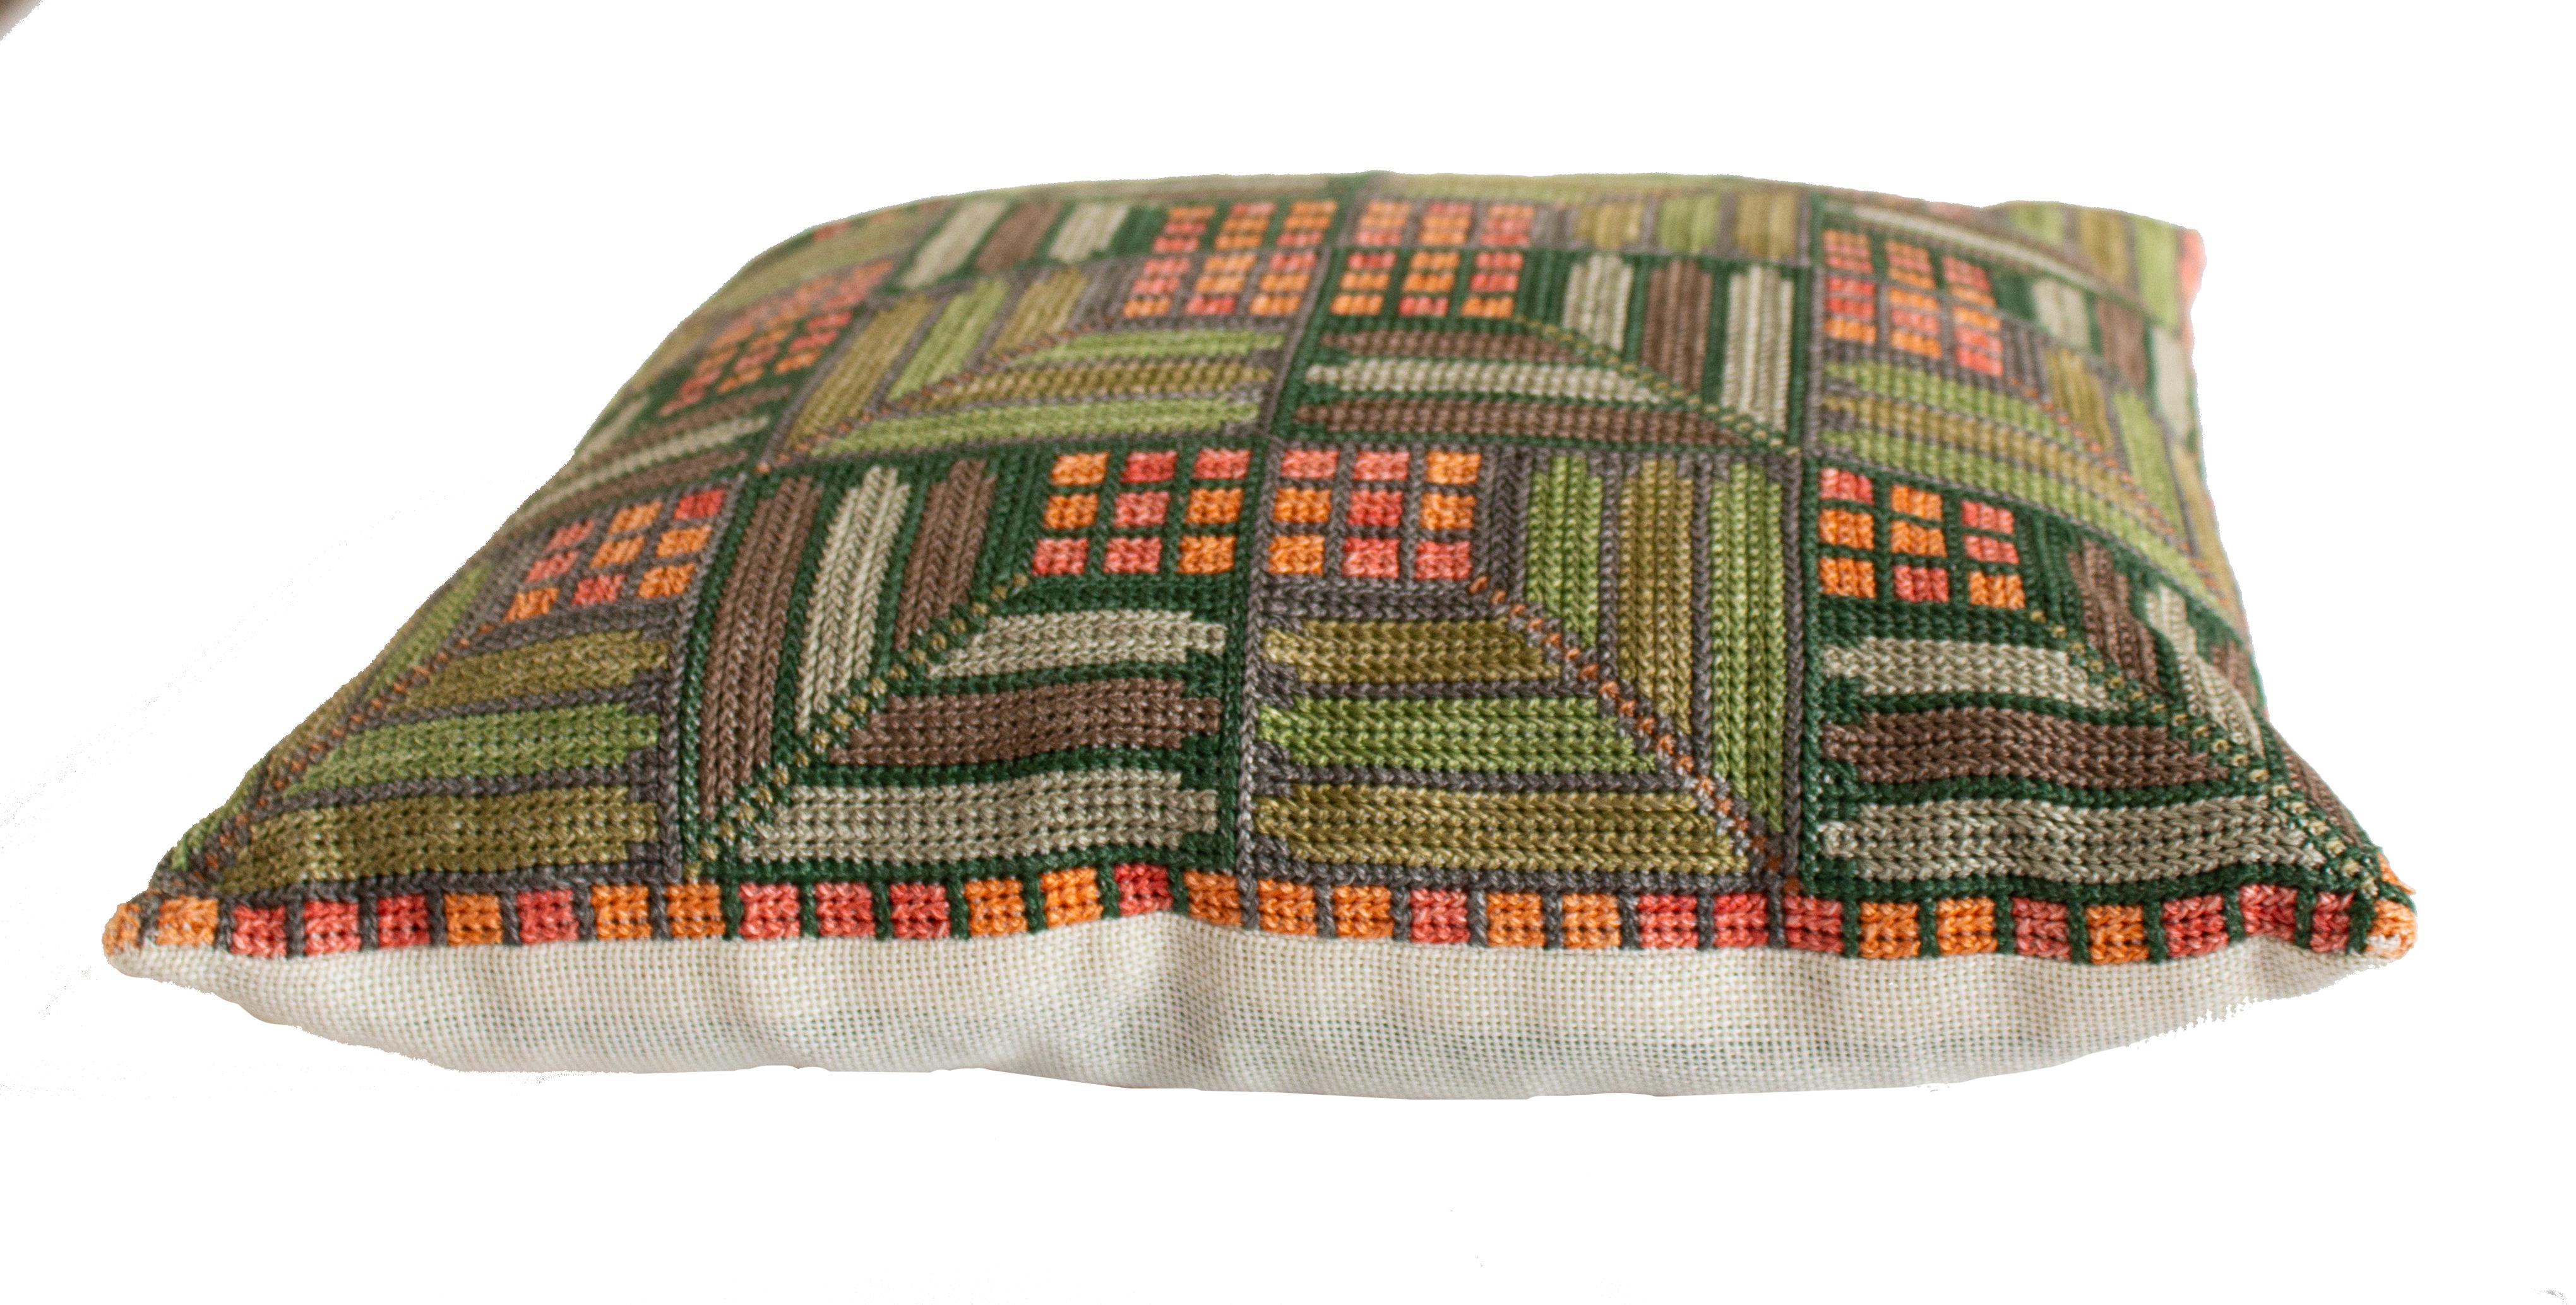 Handmade fabulous midcentury geometric inspired needlepoint pillow with linen back. Tones with green, orange, red and brown. From Sweden with love.